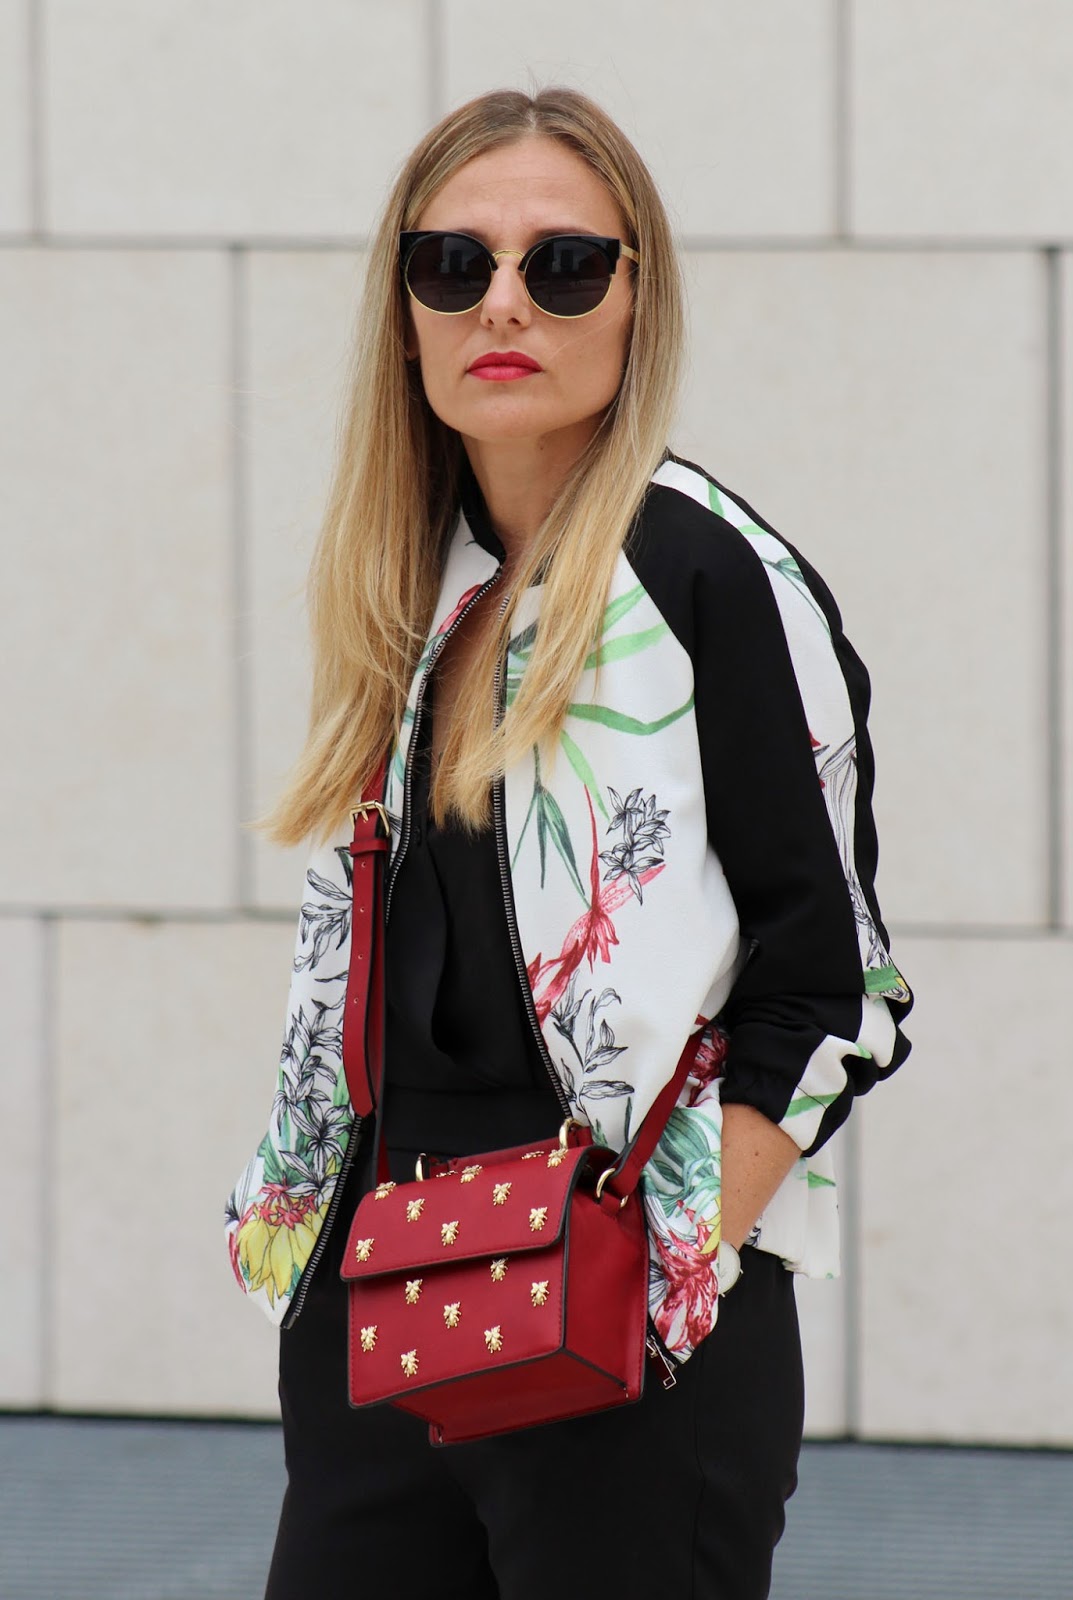 Eniwhere Fashion - Zaful - Black jumpsuit and floral bomber